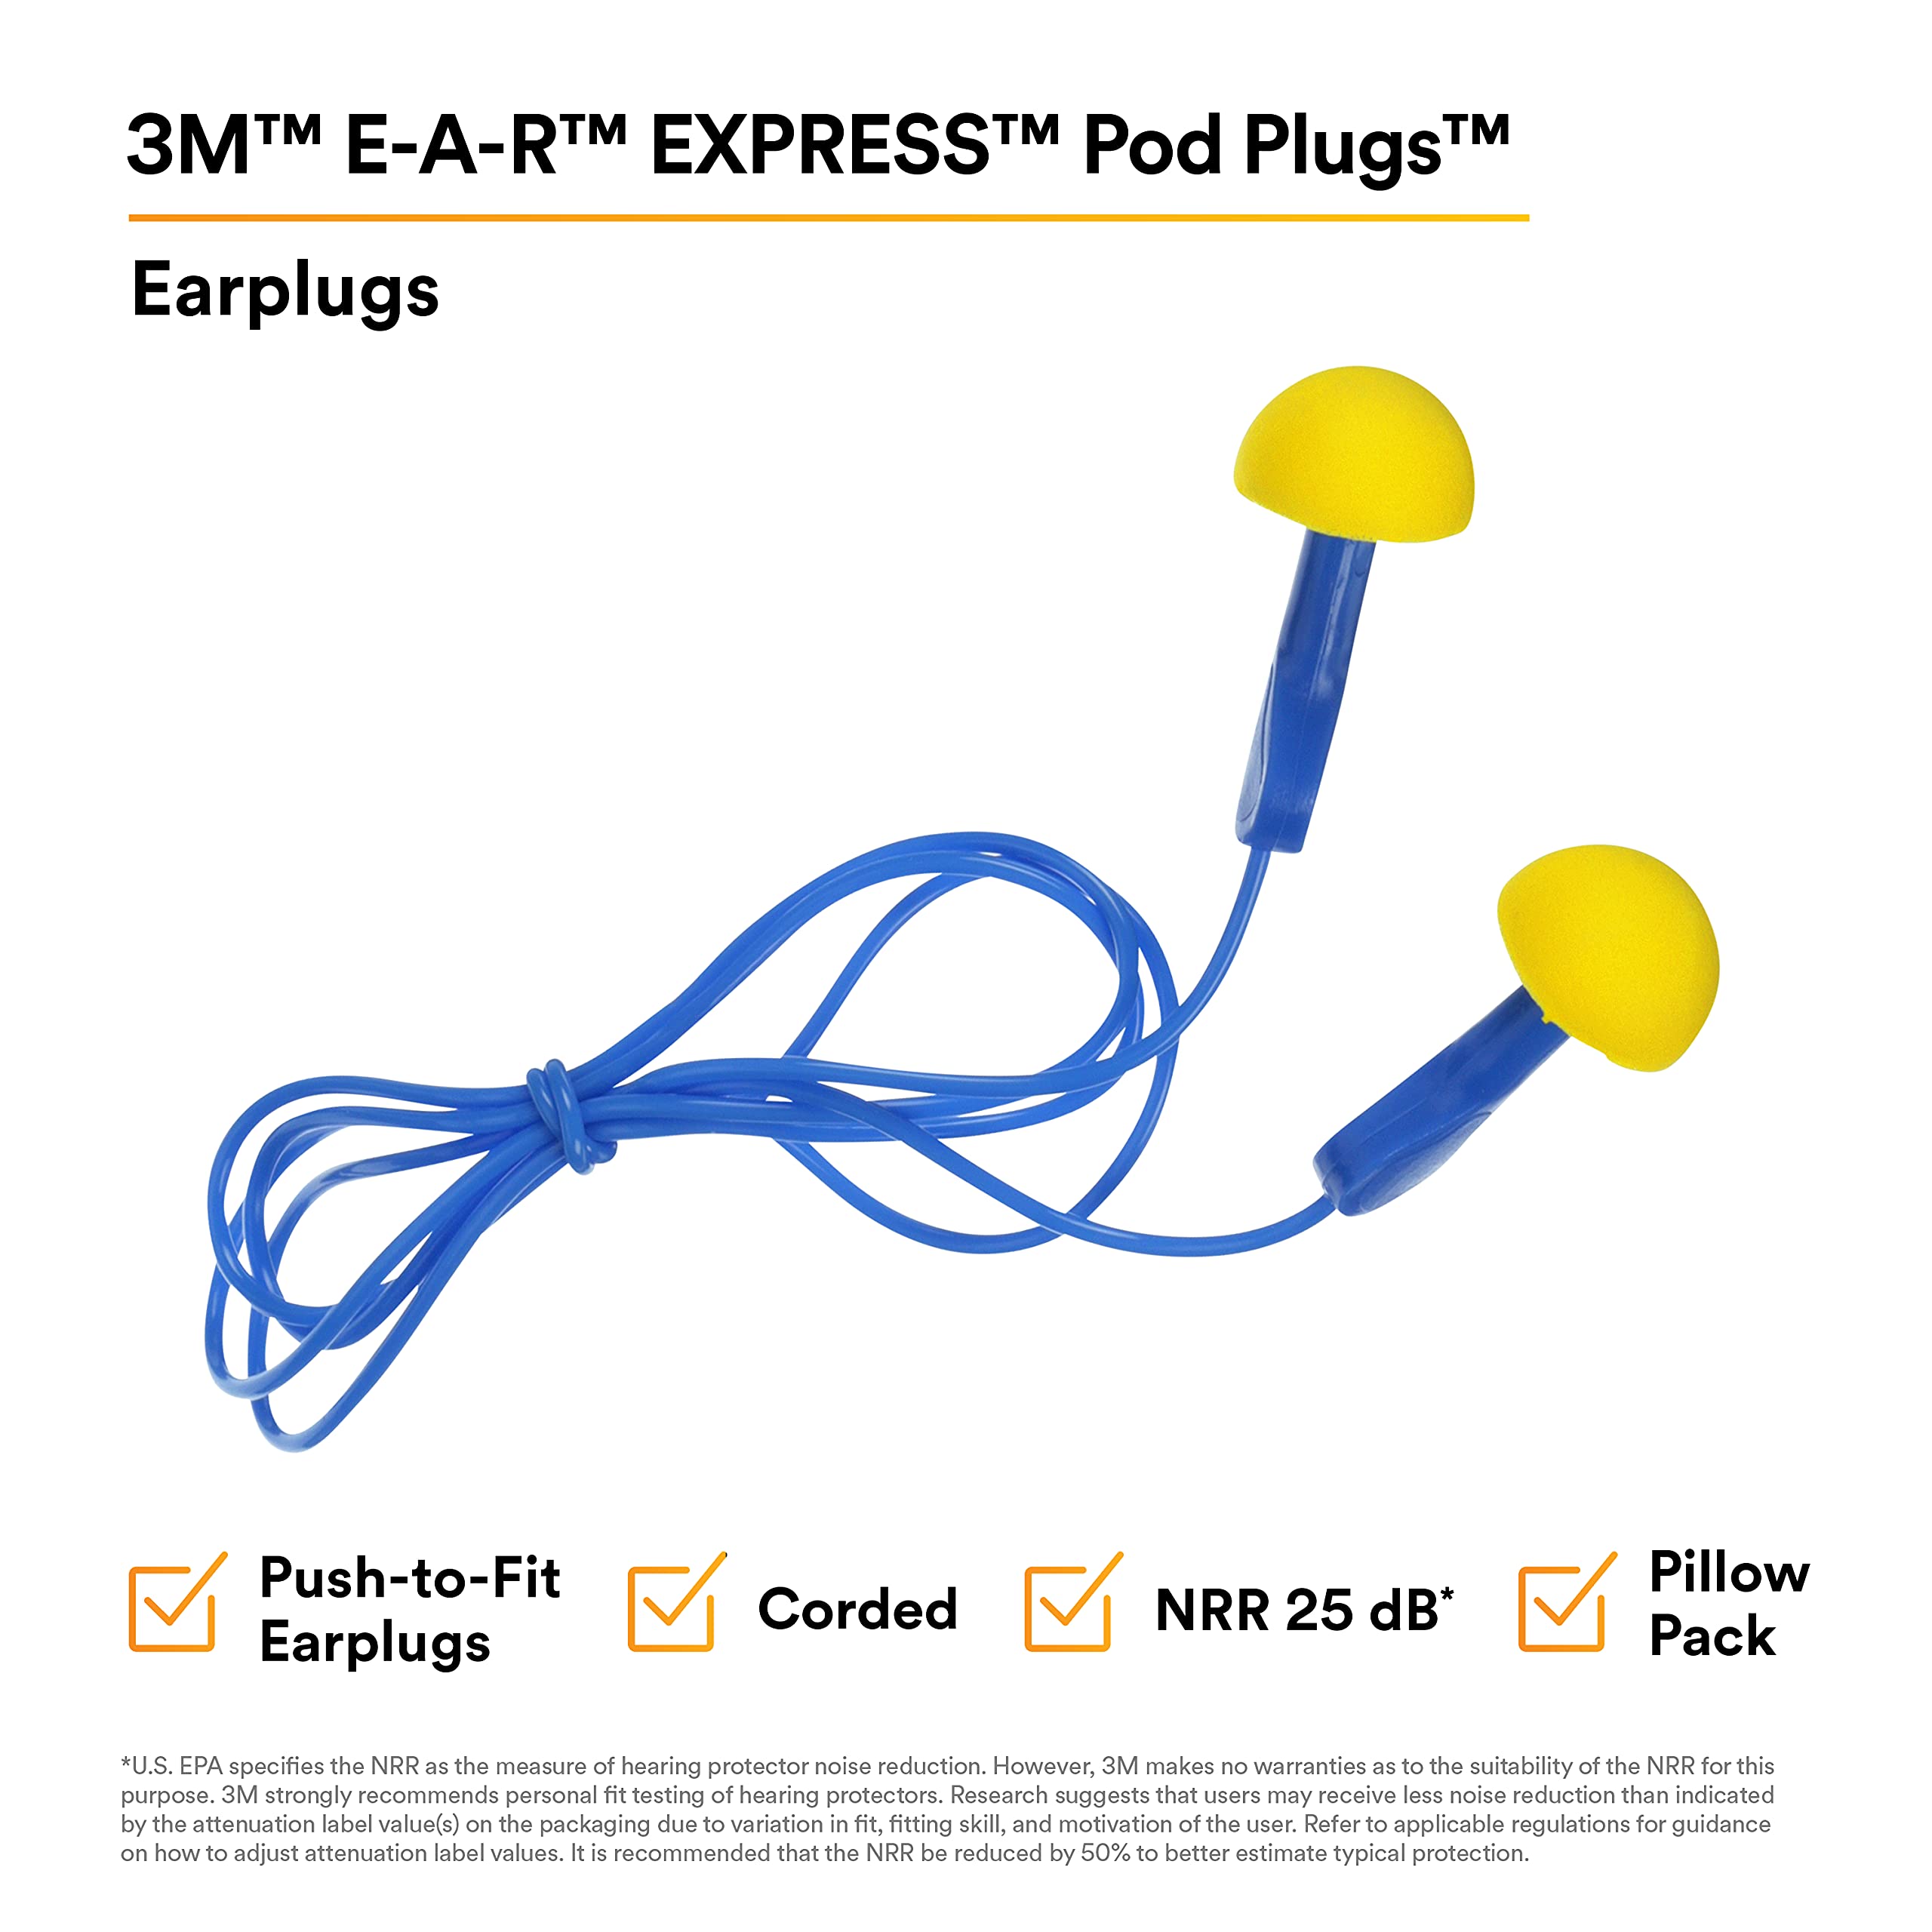 3M E-A-R EXPRESS Pod Plugs Ear Plugs 311-1114, Corded, Blue Grips, Pillow Pack